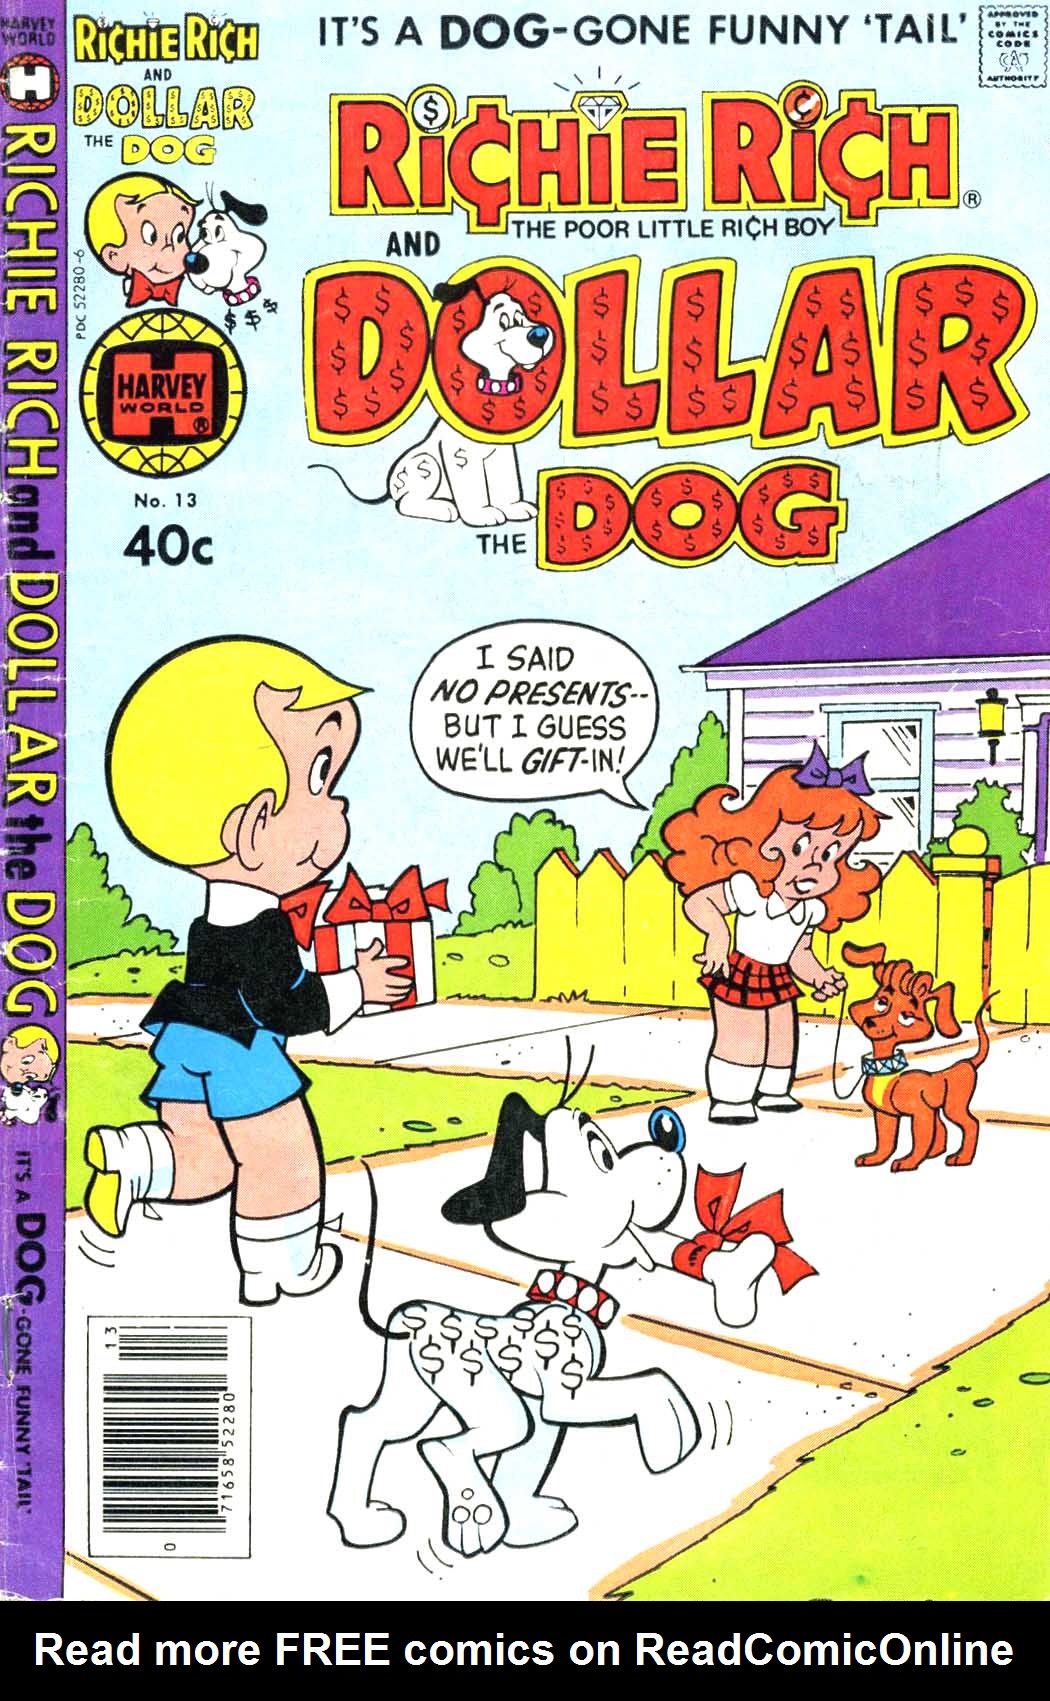 Read online Richie Rich & Dollar the Dog comic -  Issue #13 - 1